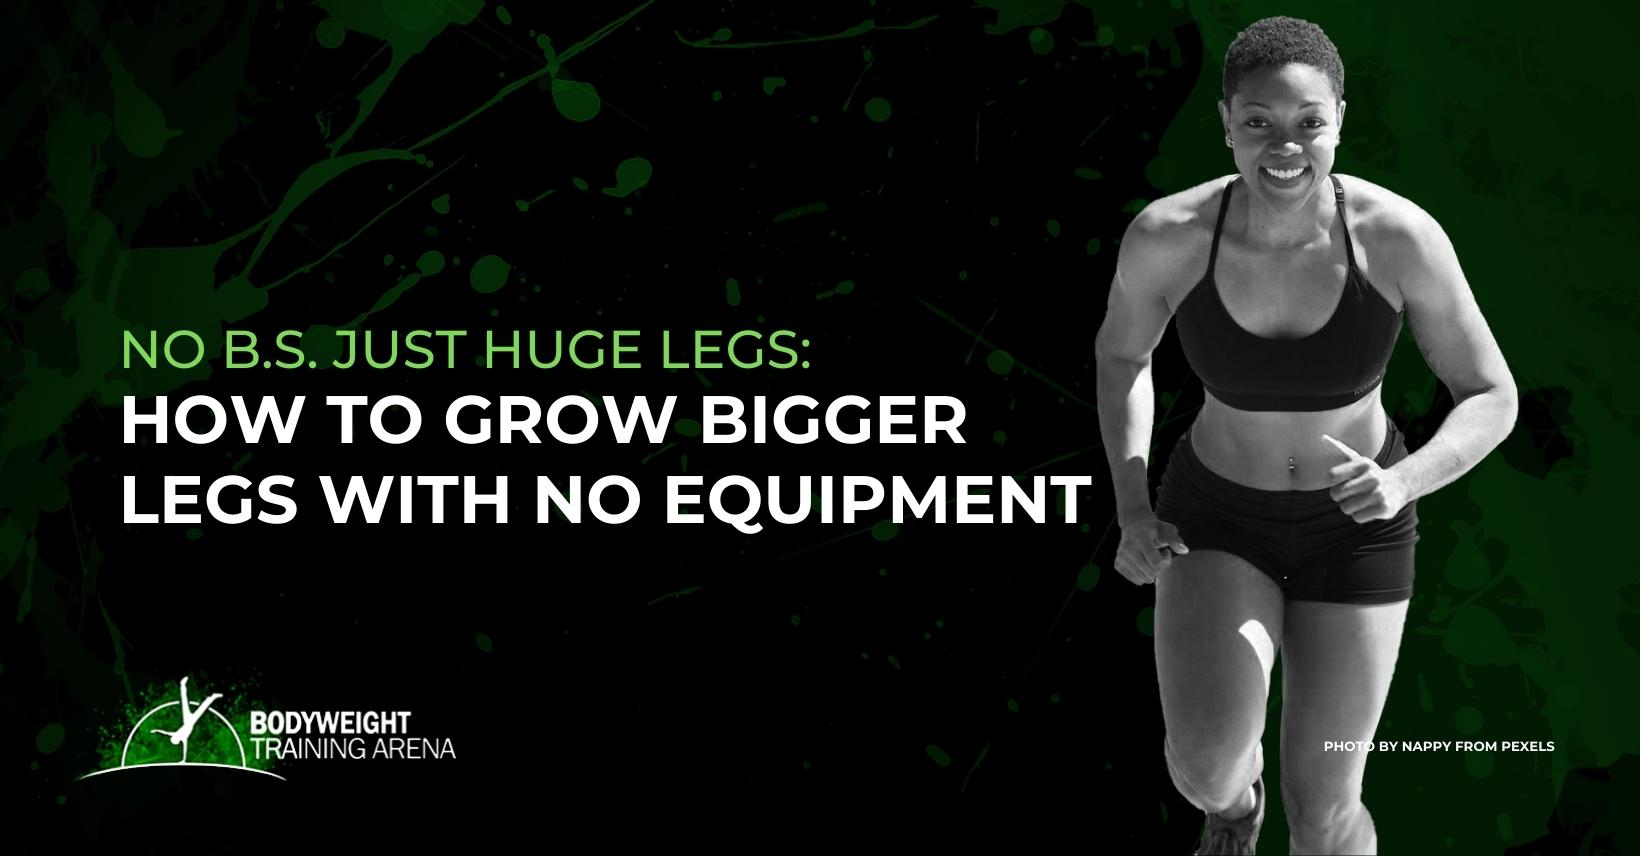 NO B.S. Just Huge Legs: How to Grow Bigger Legs with NO EQUIPMENT